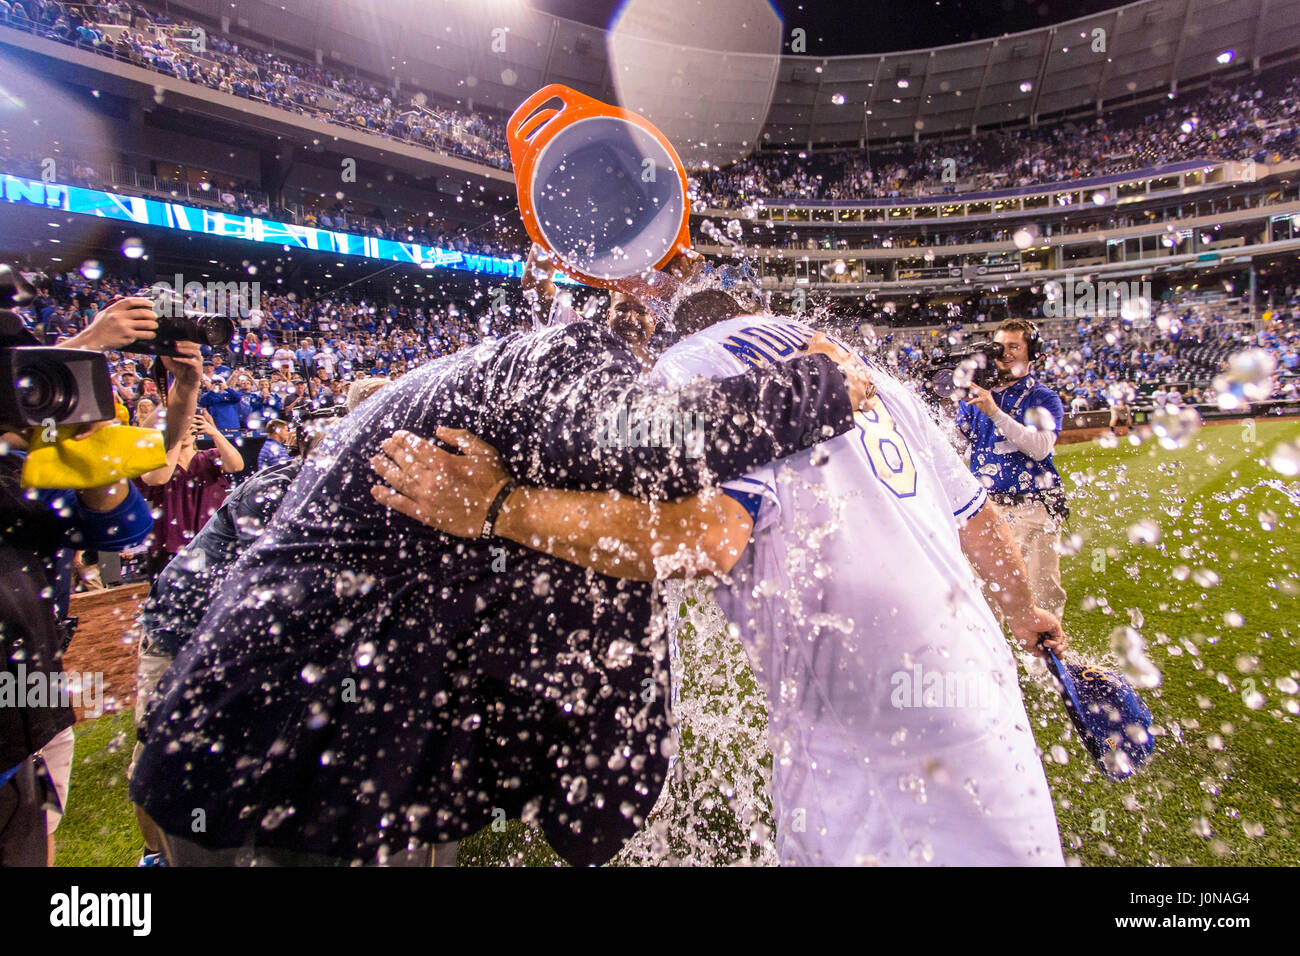 Kansas City, MO, USA. 14th Apr, 2017. Mike Moustakas #8 and announcer Joel Goldberg take a dunk of water from Salvador Perez #13 of the Kansas City Royals after the MLB game action between the Kansas City Royals and the Los Angeles Angels at Kauffman Stadium in Kansas City, MO. Kyle Rivas/CSM/Alamy Live News Stock Photo